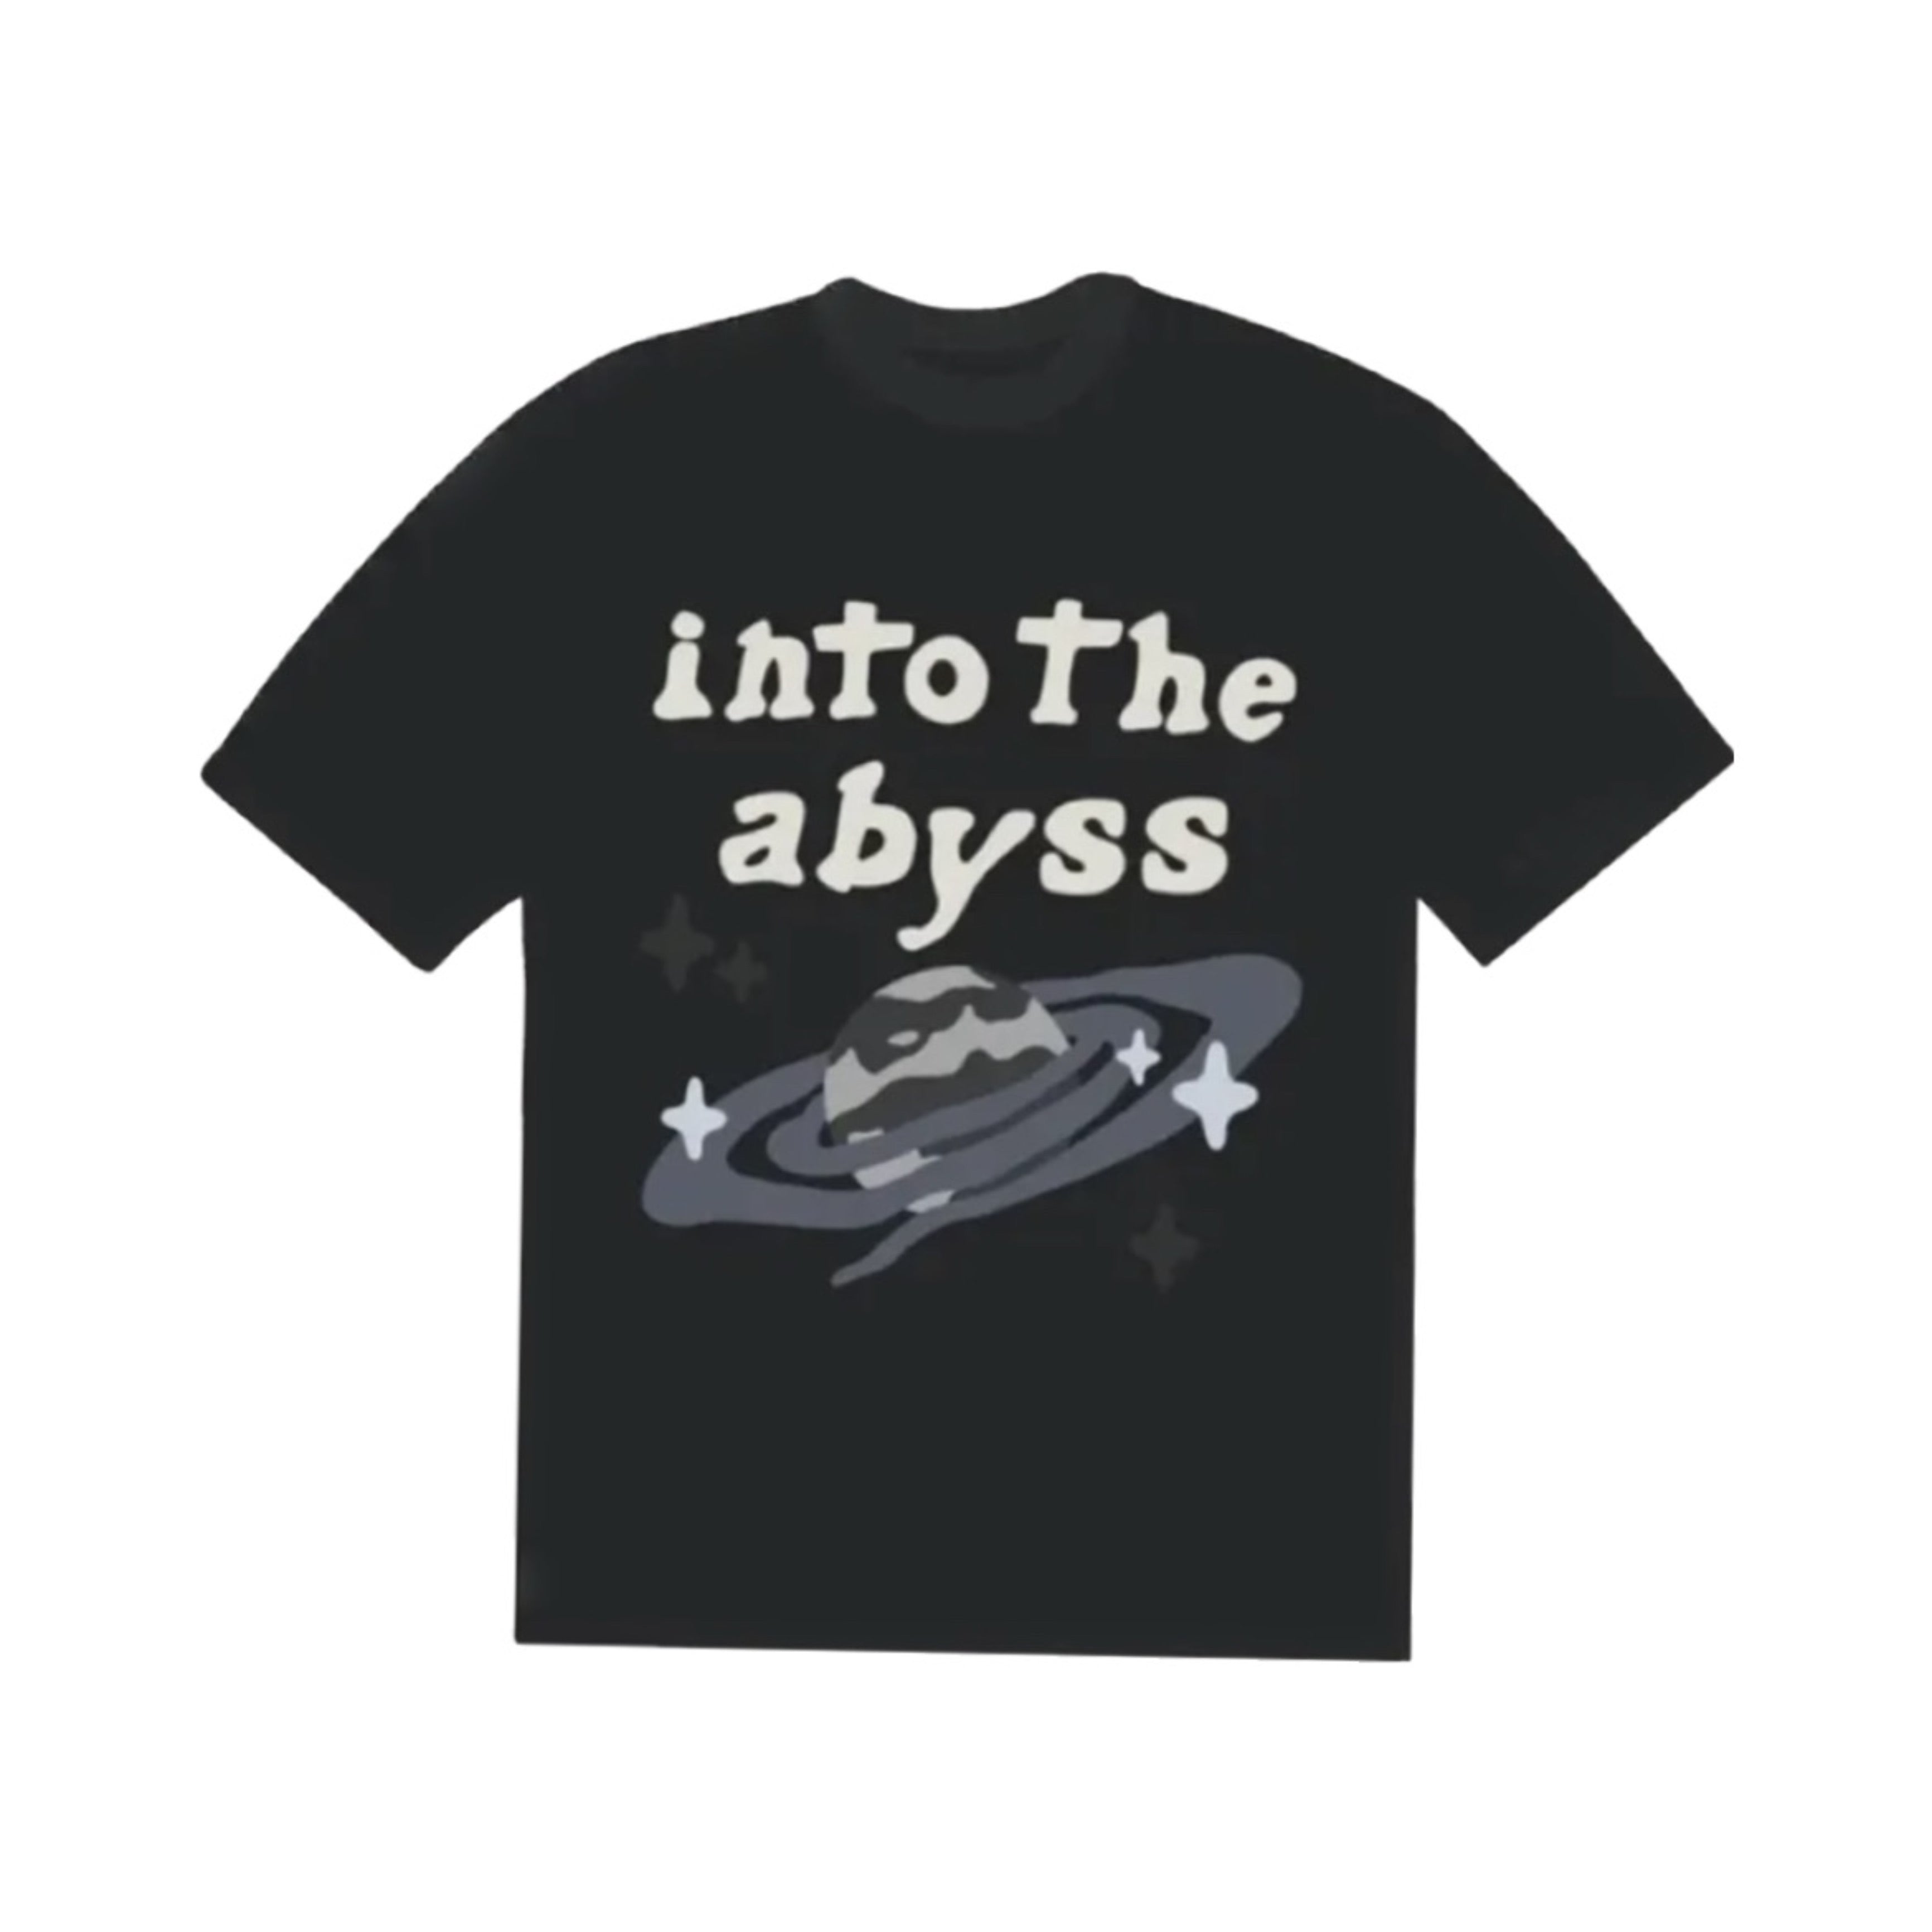 Broken Planet Market 'Into the abyss' T-Shirt – Garms Unlimited